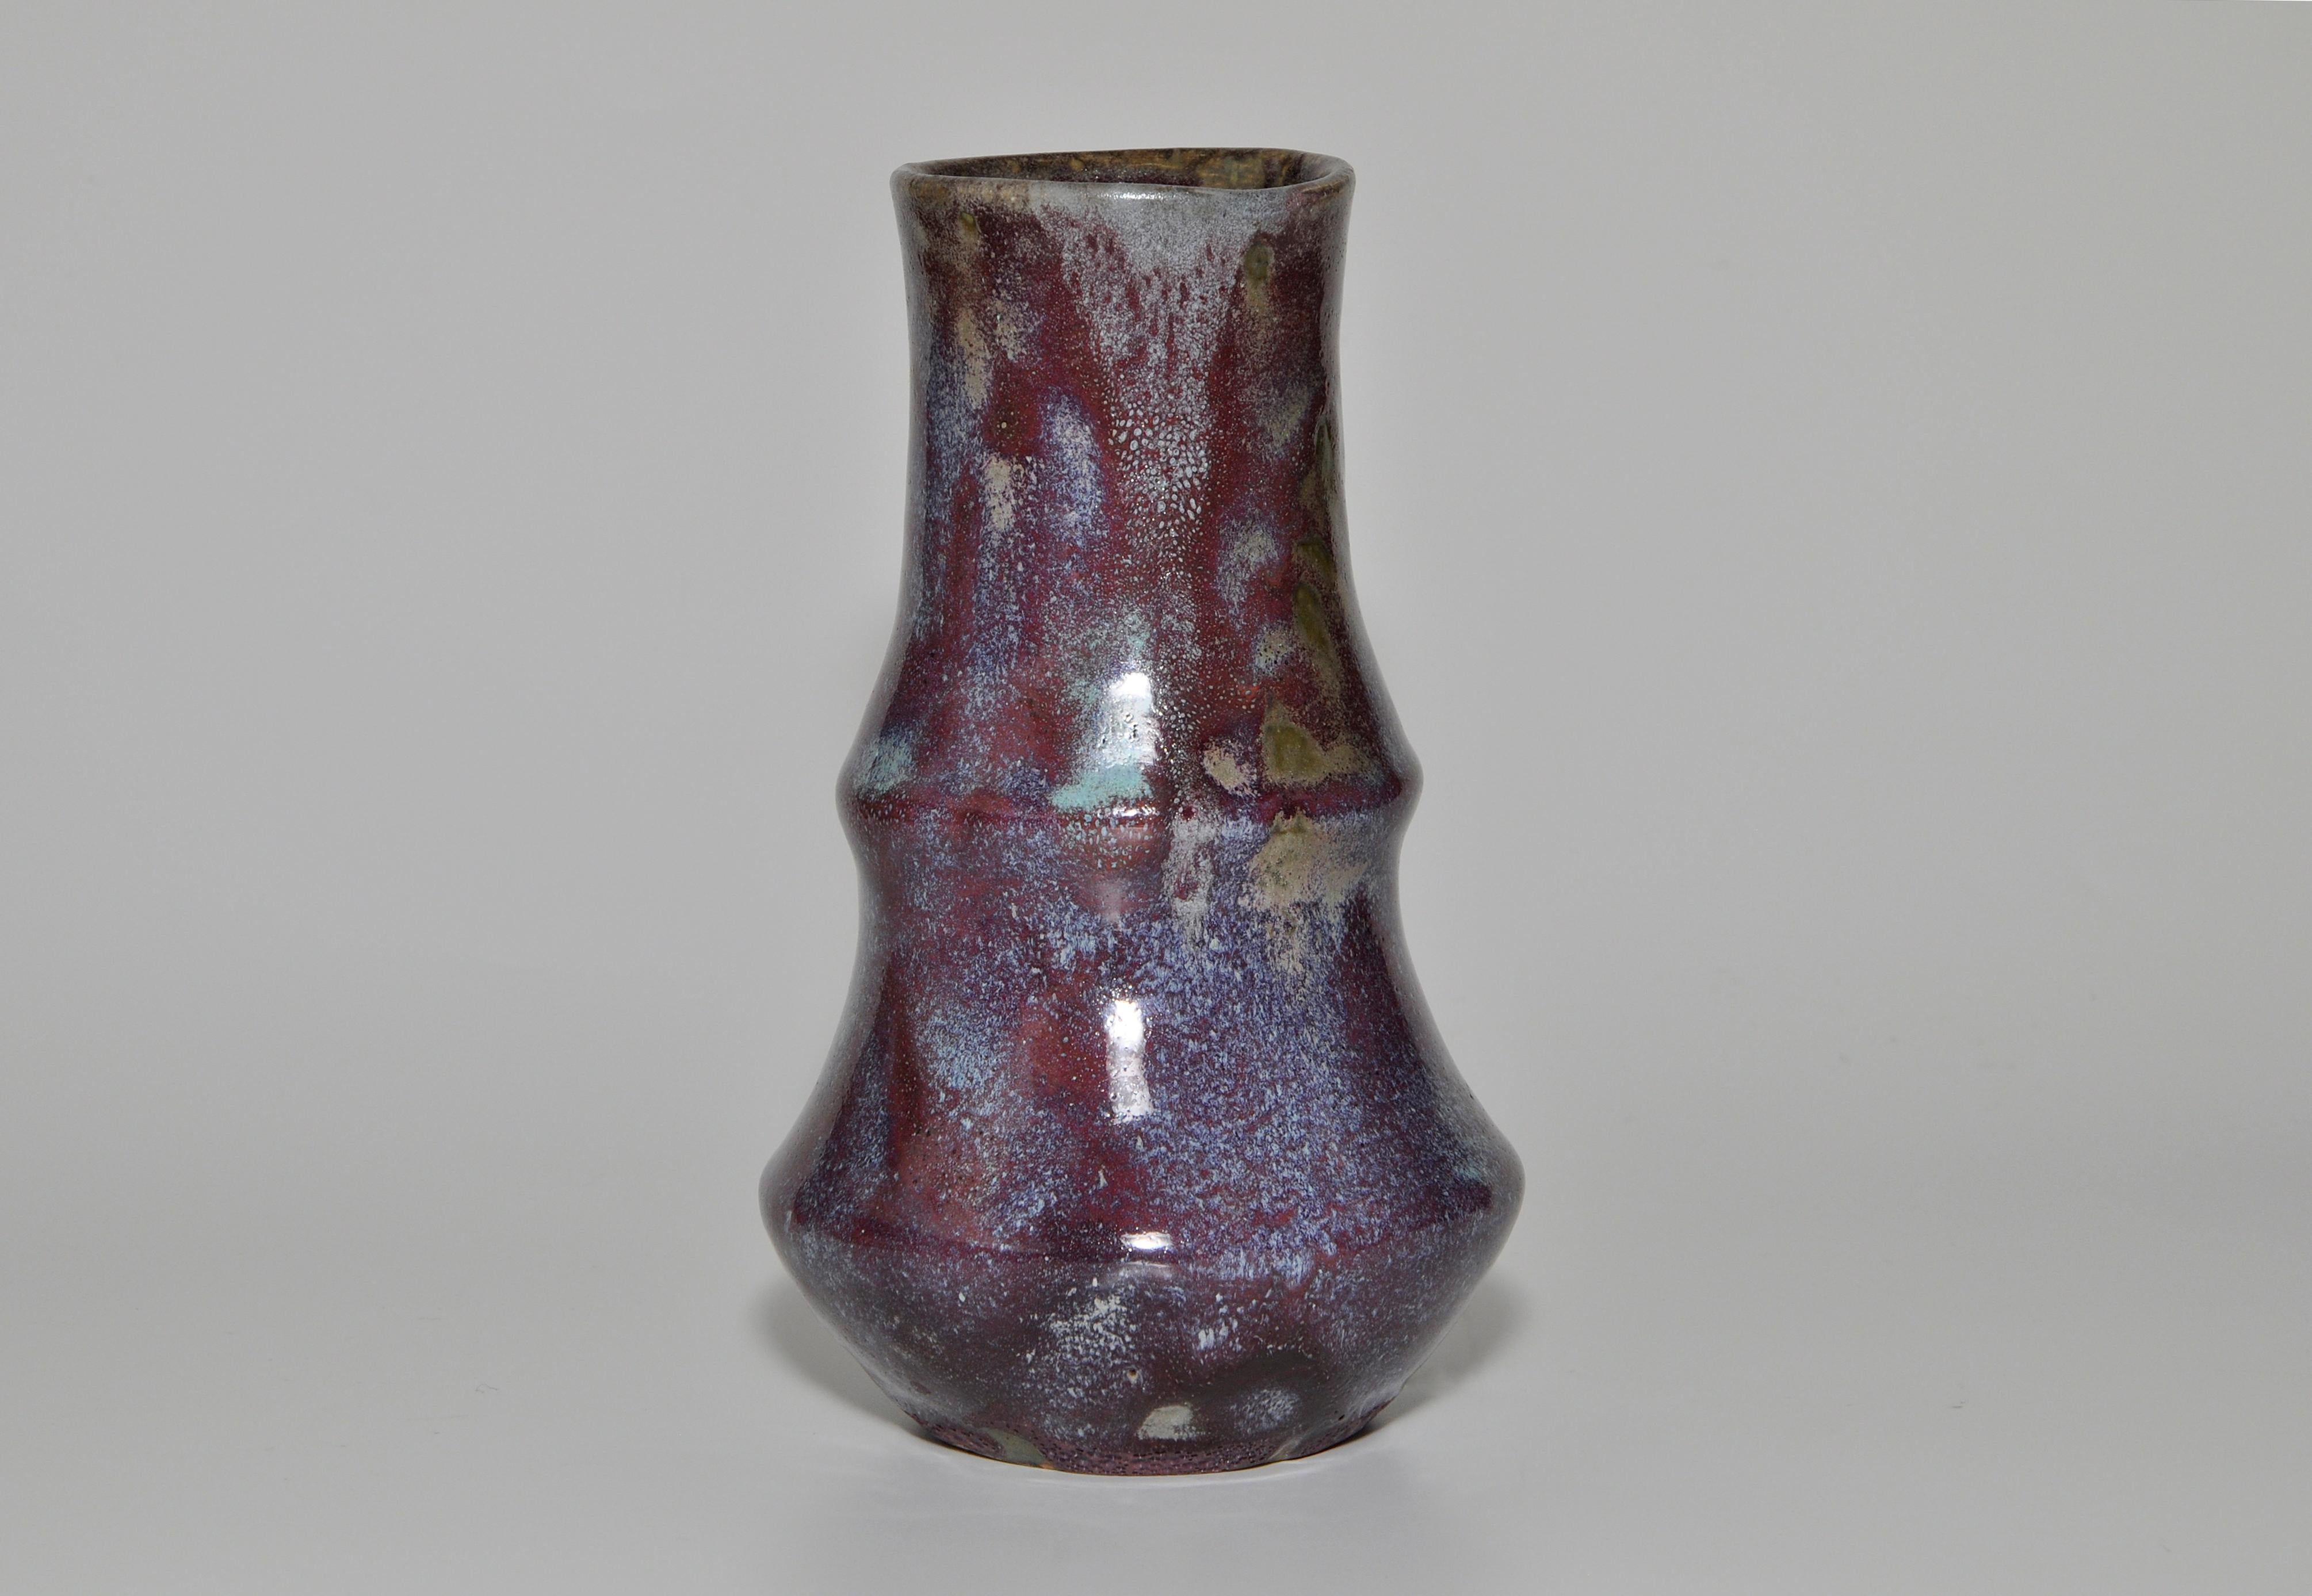 Purple Japonist Art Pottery by Eugene lion vase 

A perfect piece of Japonist ceramic art. By French art potter Eugene Lion, in a very interesting and unusual shape in stoneware, glossy mottled purple hues with subtle speckled mix of shades.